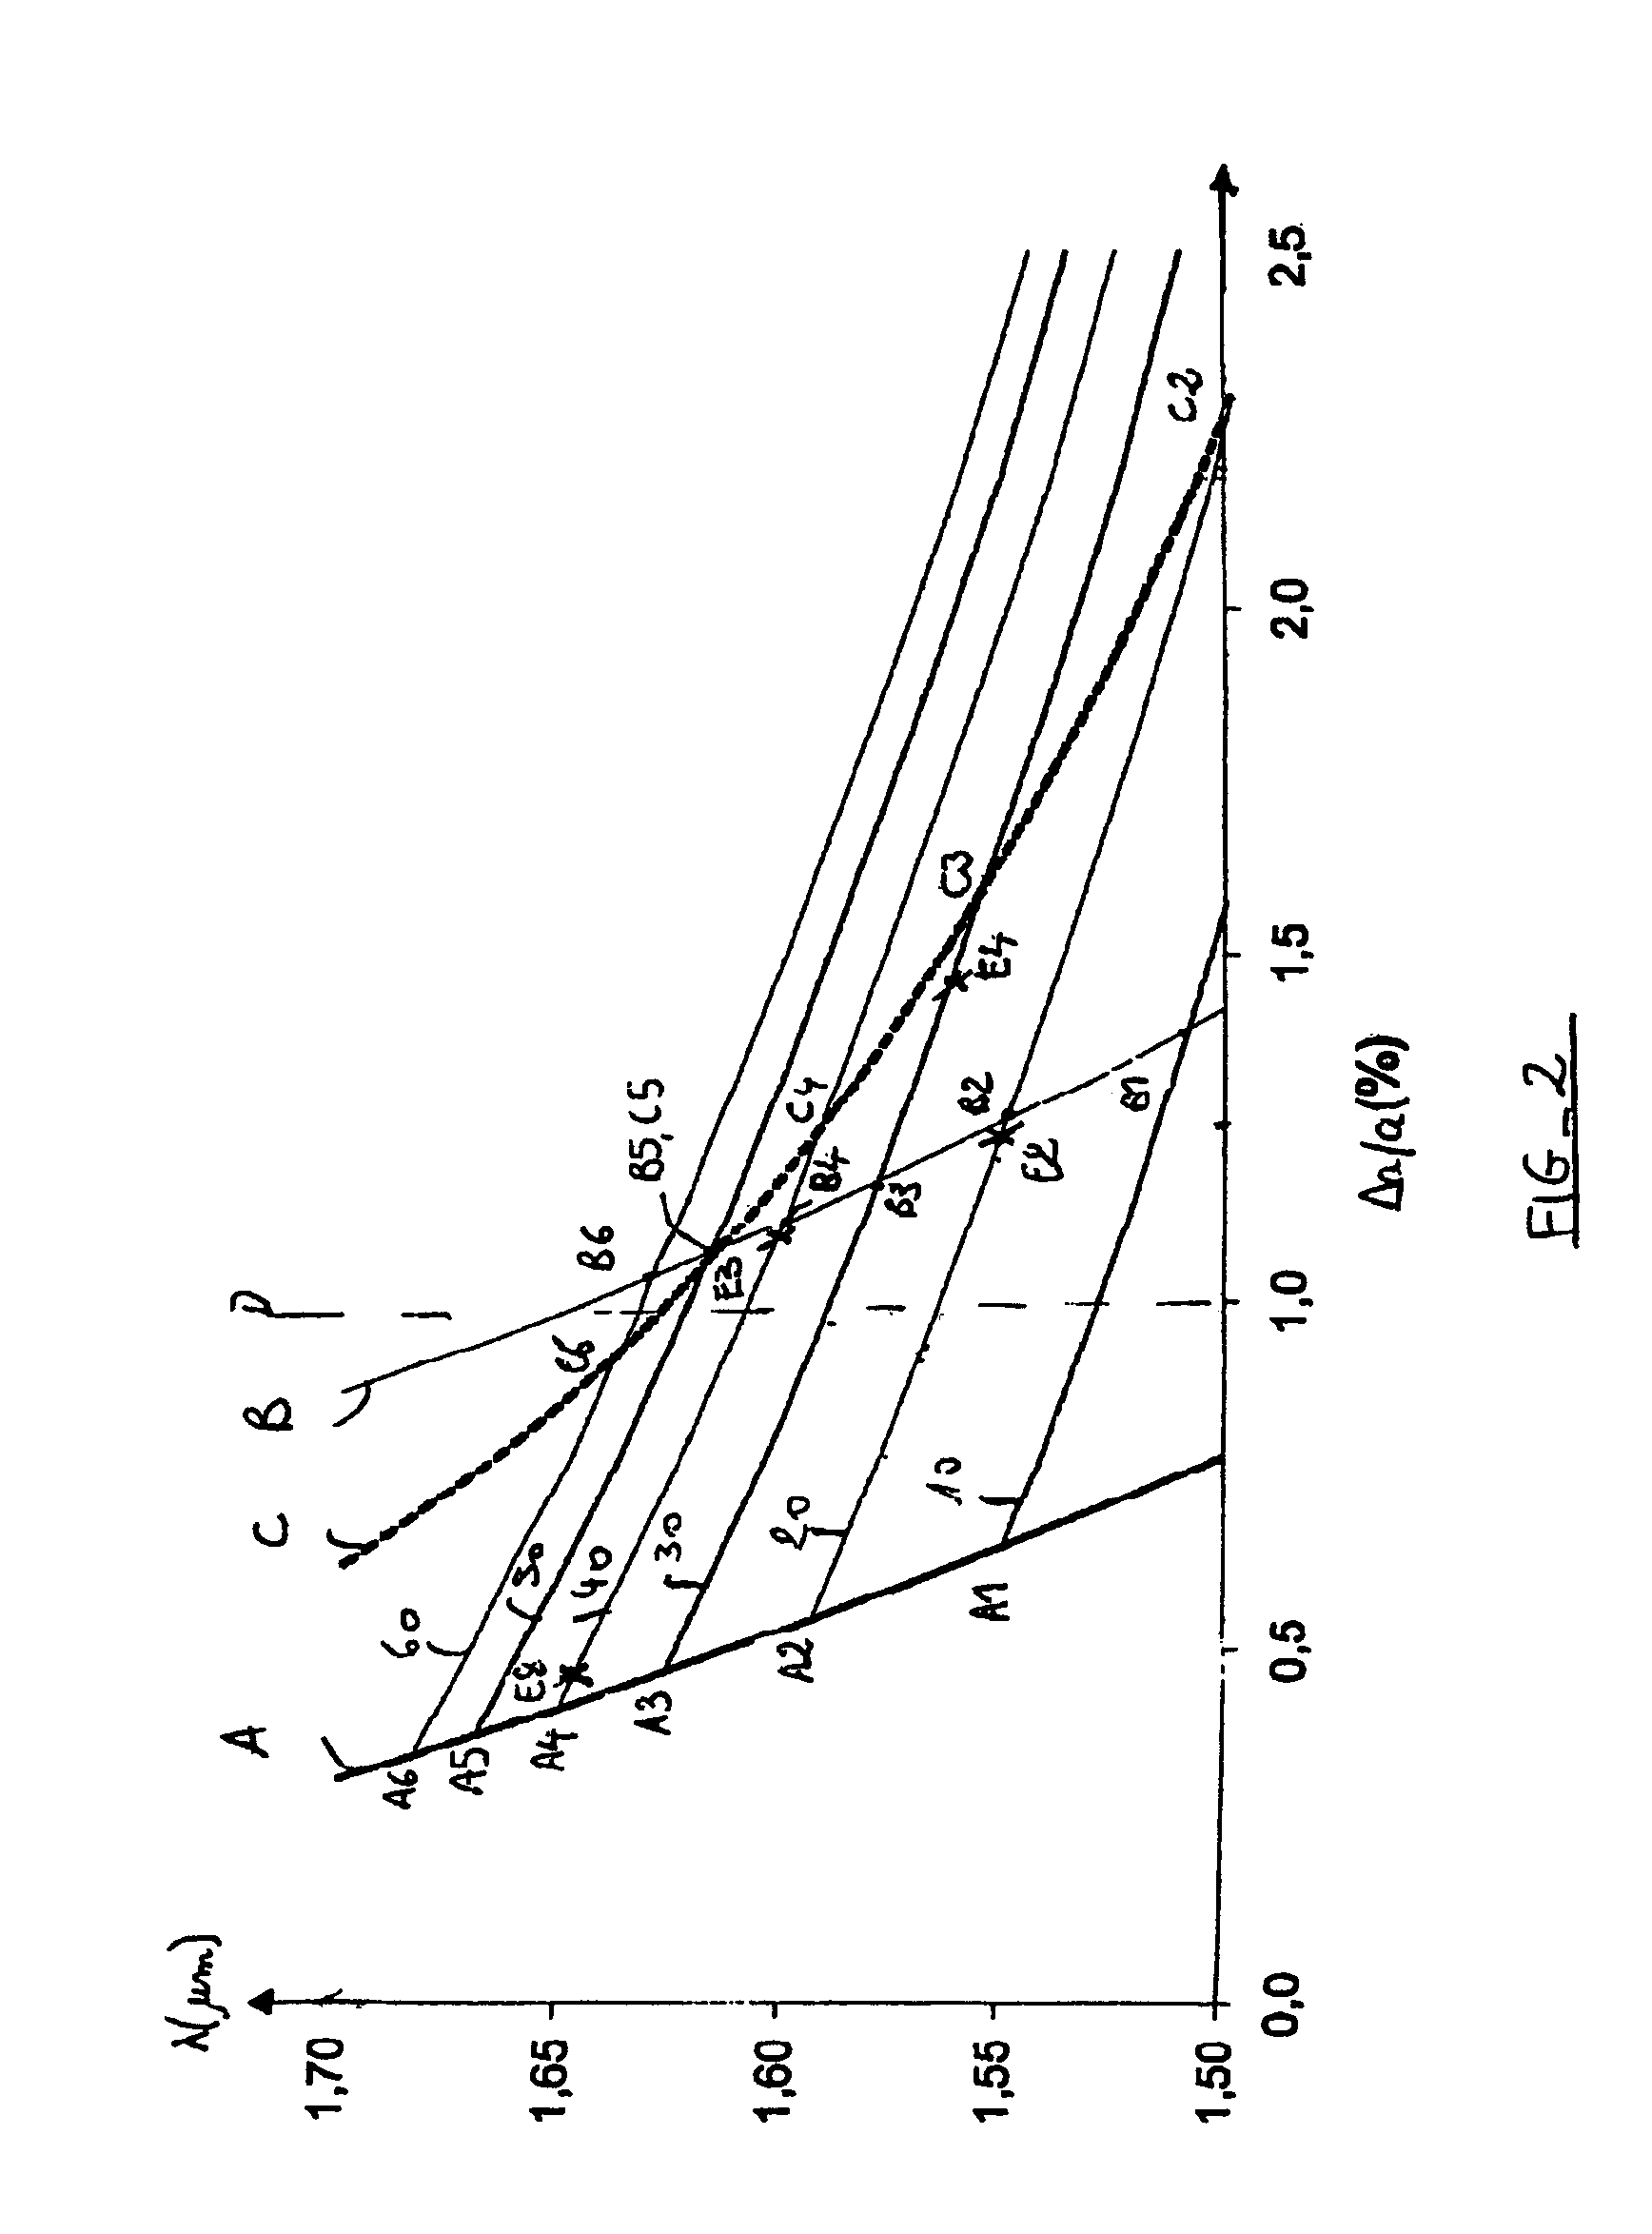 Semiconductor optical device on an indium phosphide substrate for long operating wavelengths